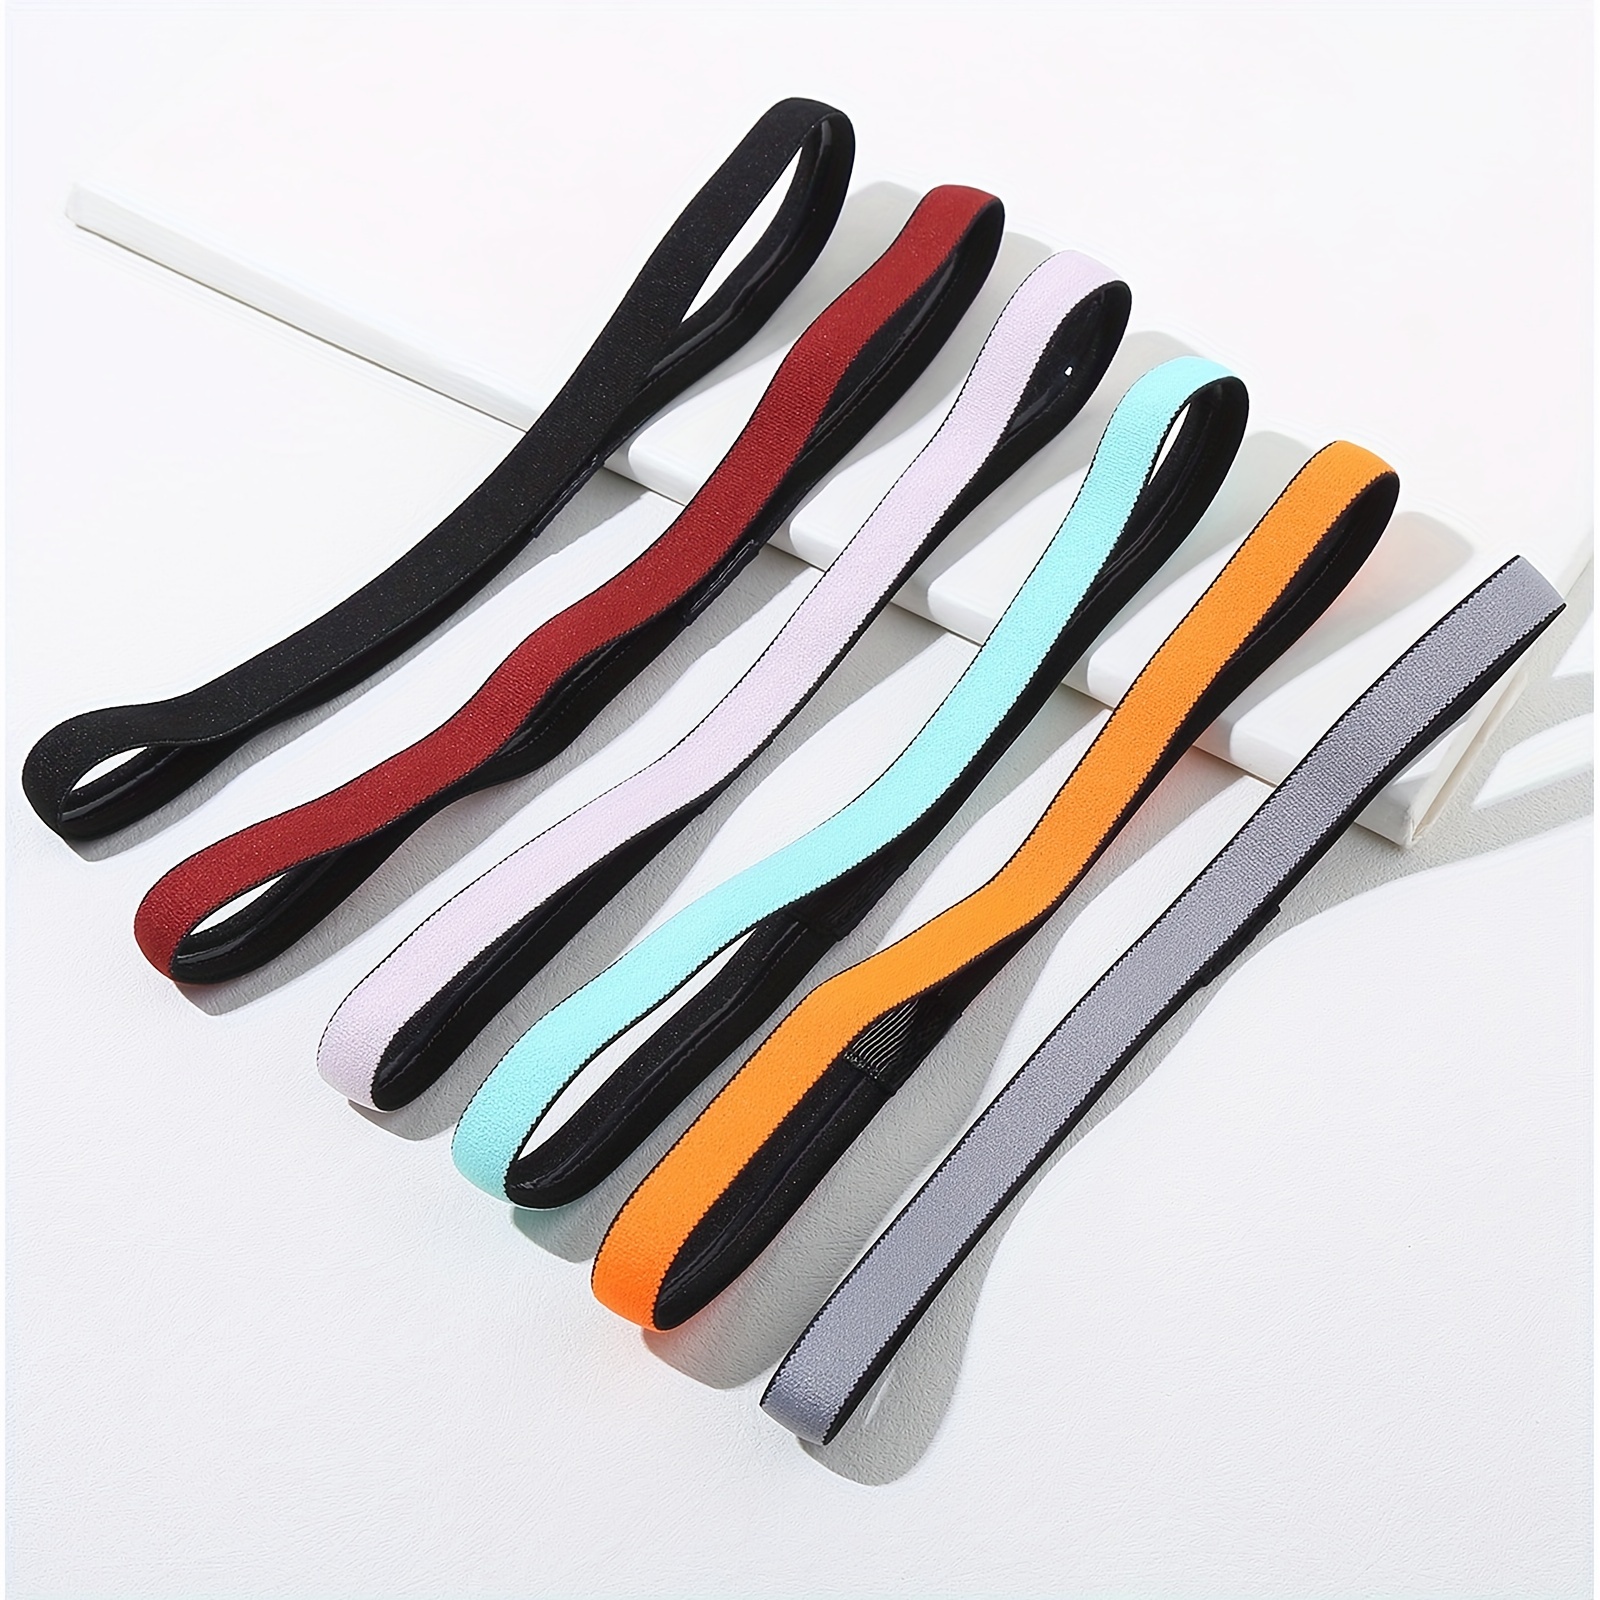 30 Pieces Elastic Sport Headbands Thin Elastic Exercise Skinny Athletic  Hair Bands Anti-Slip Stretchy Sweatbands for Men and Women Running Jogging